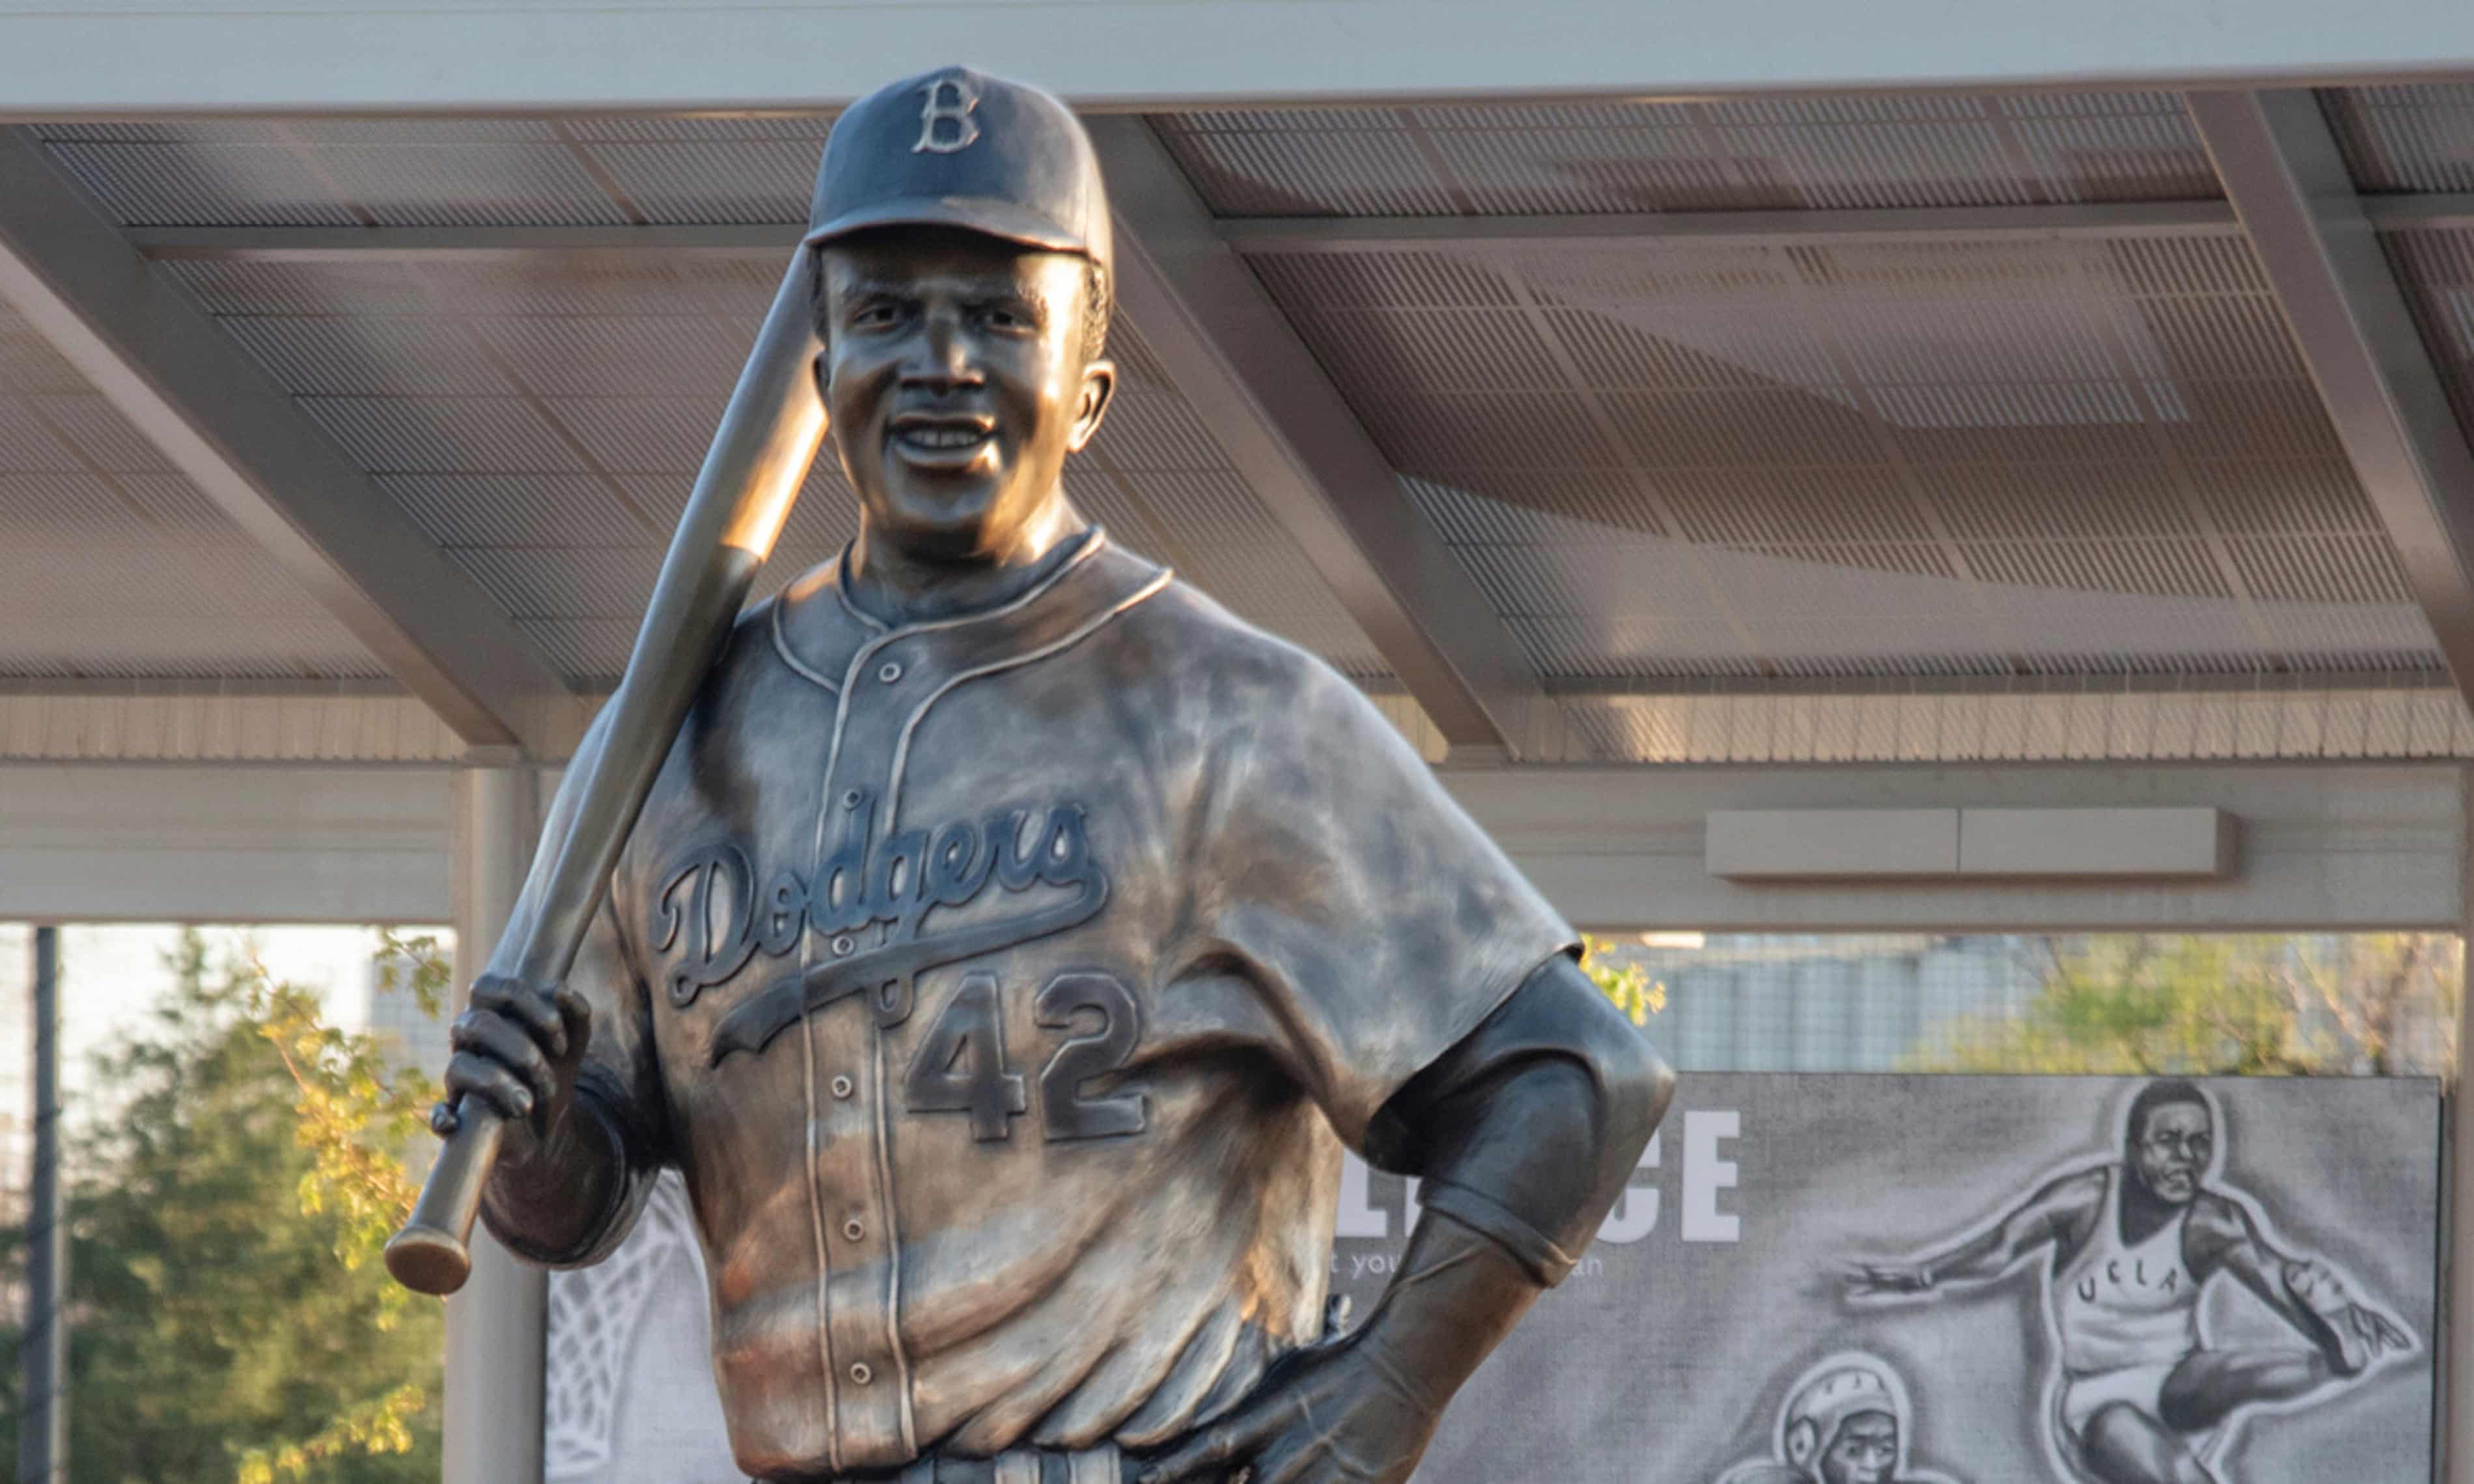 Stolen Jackie Robinson statue will be replaced after more than $160,000 donated (theguardian.com)